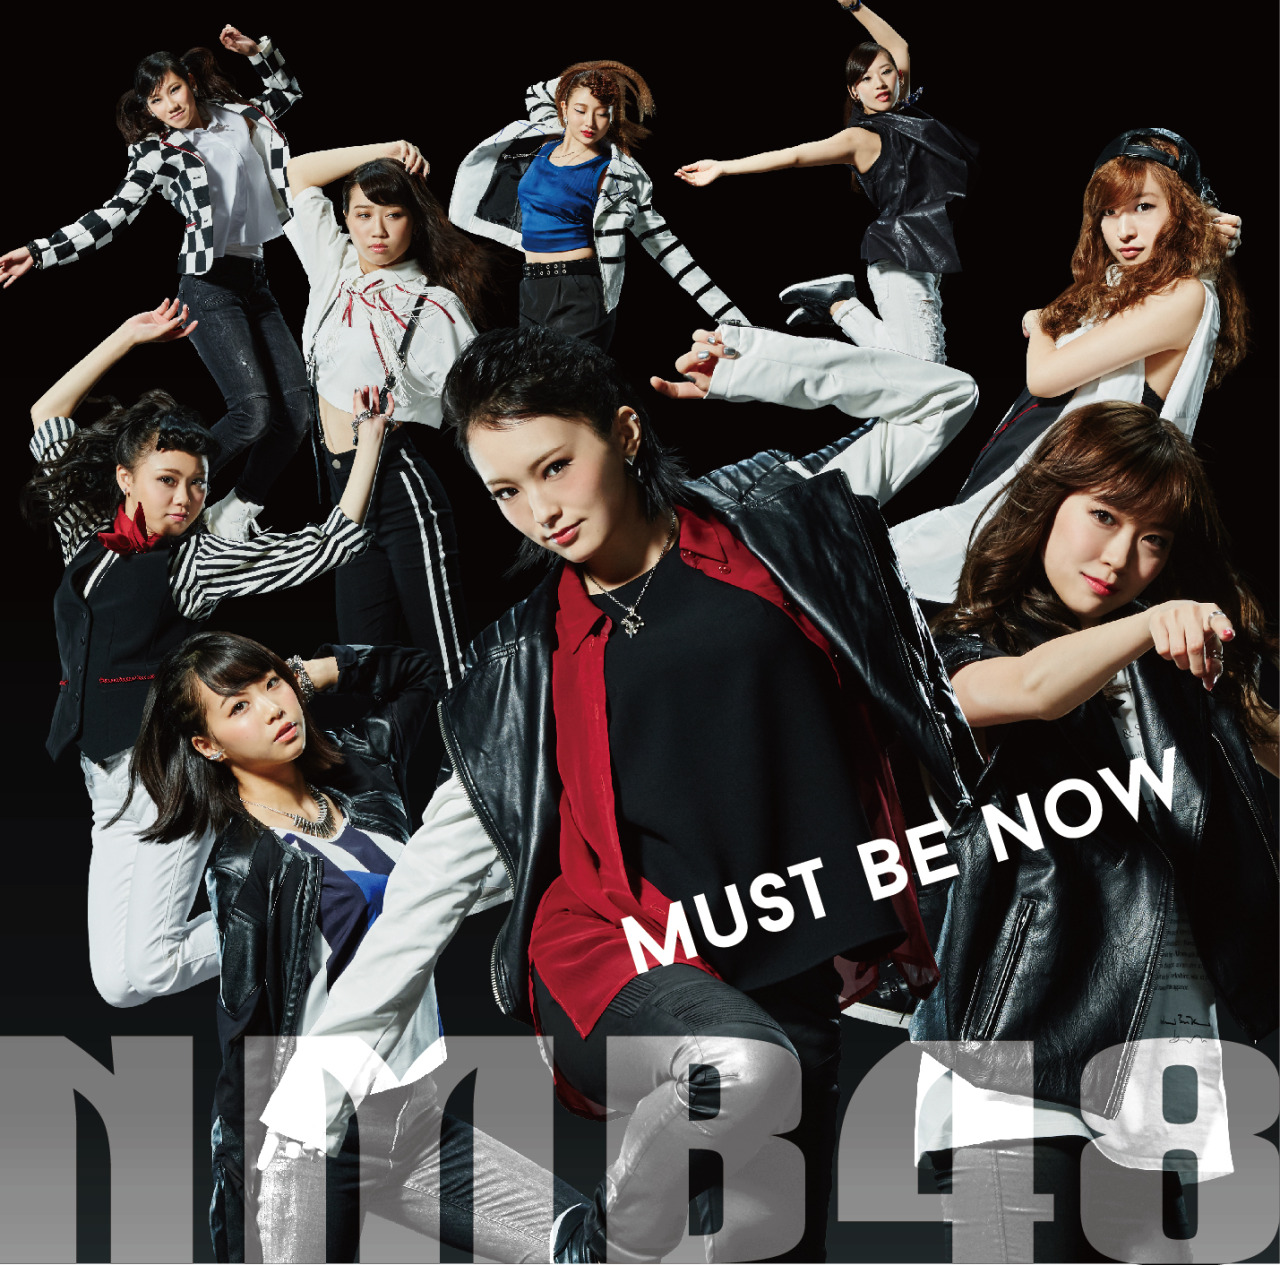 NMB48 — Must be now cover artwork